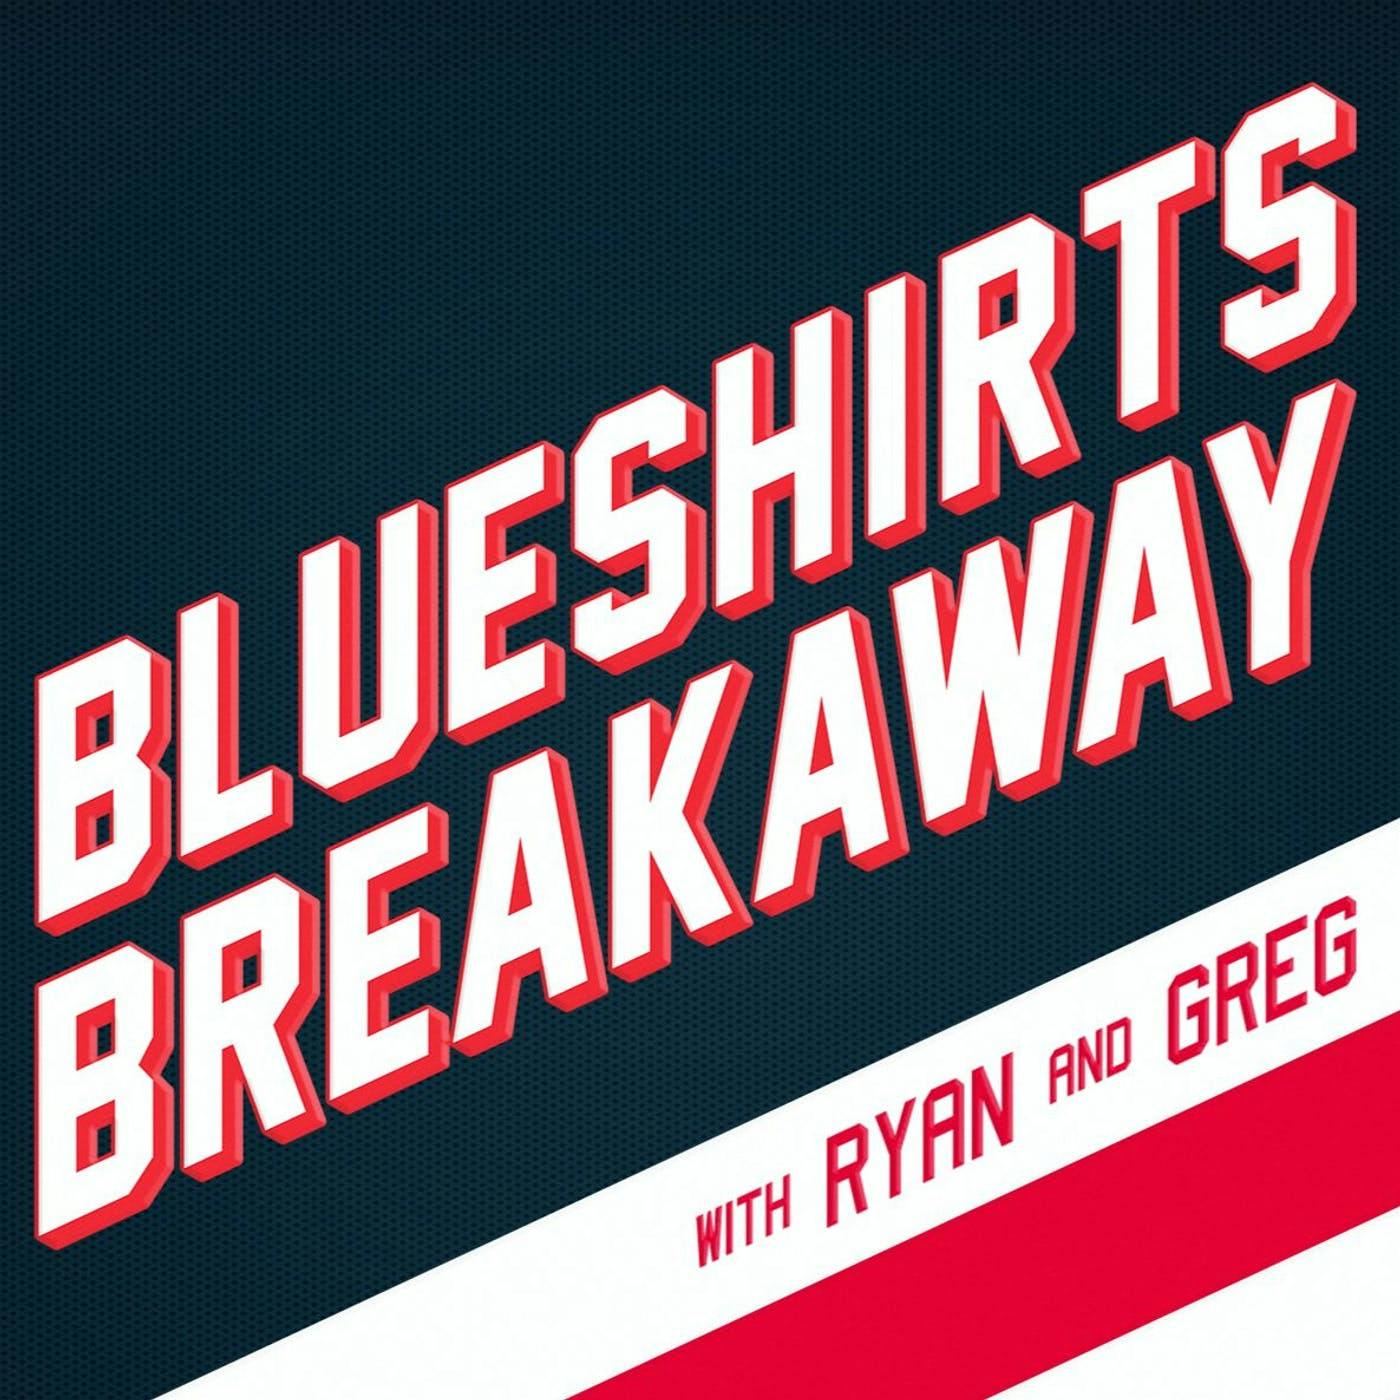 Blueshirts Breakaway EP 89 - Do the Rangers have Enough Personality and What is Hanks Legacy?